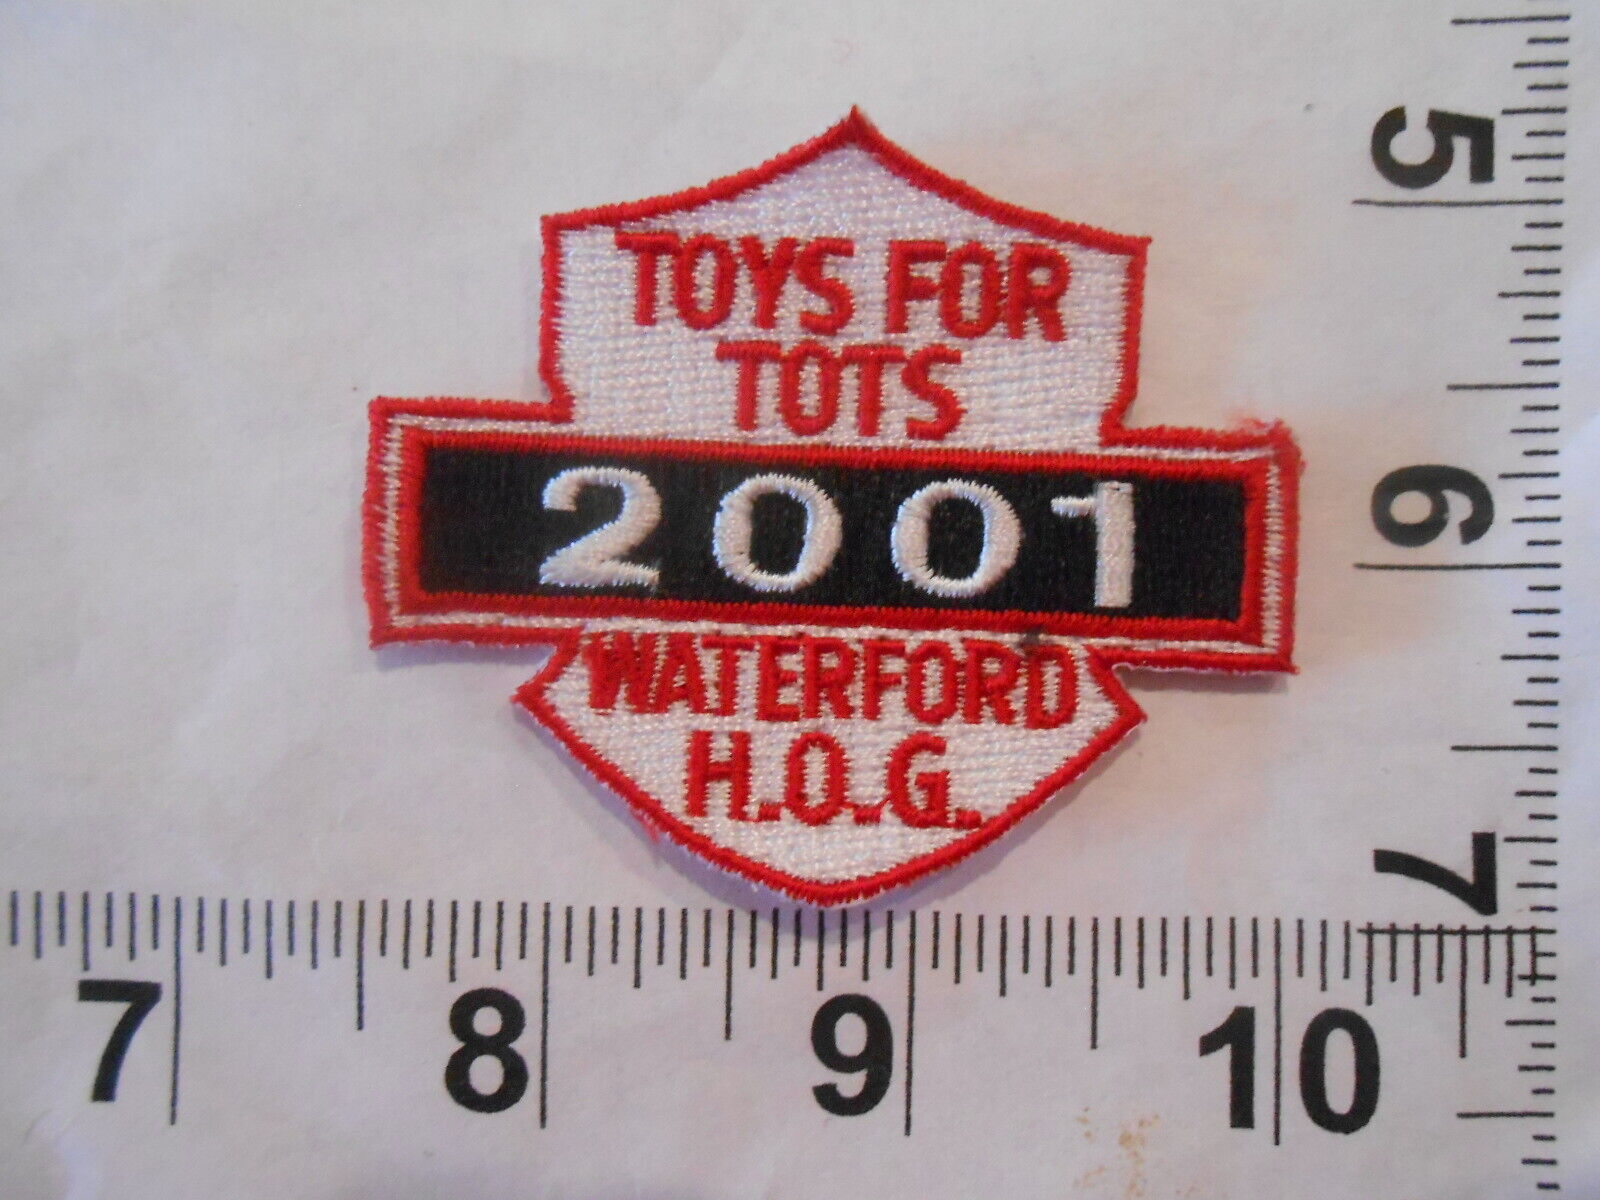 Waterford H.O.G. 2001 Toys for Tots embroidered patch      